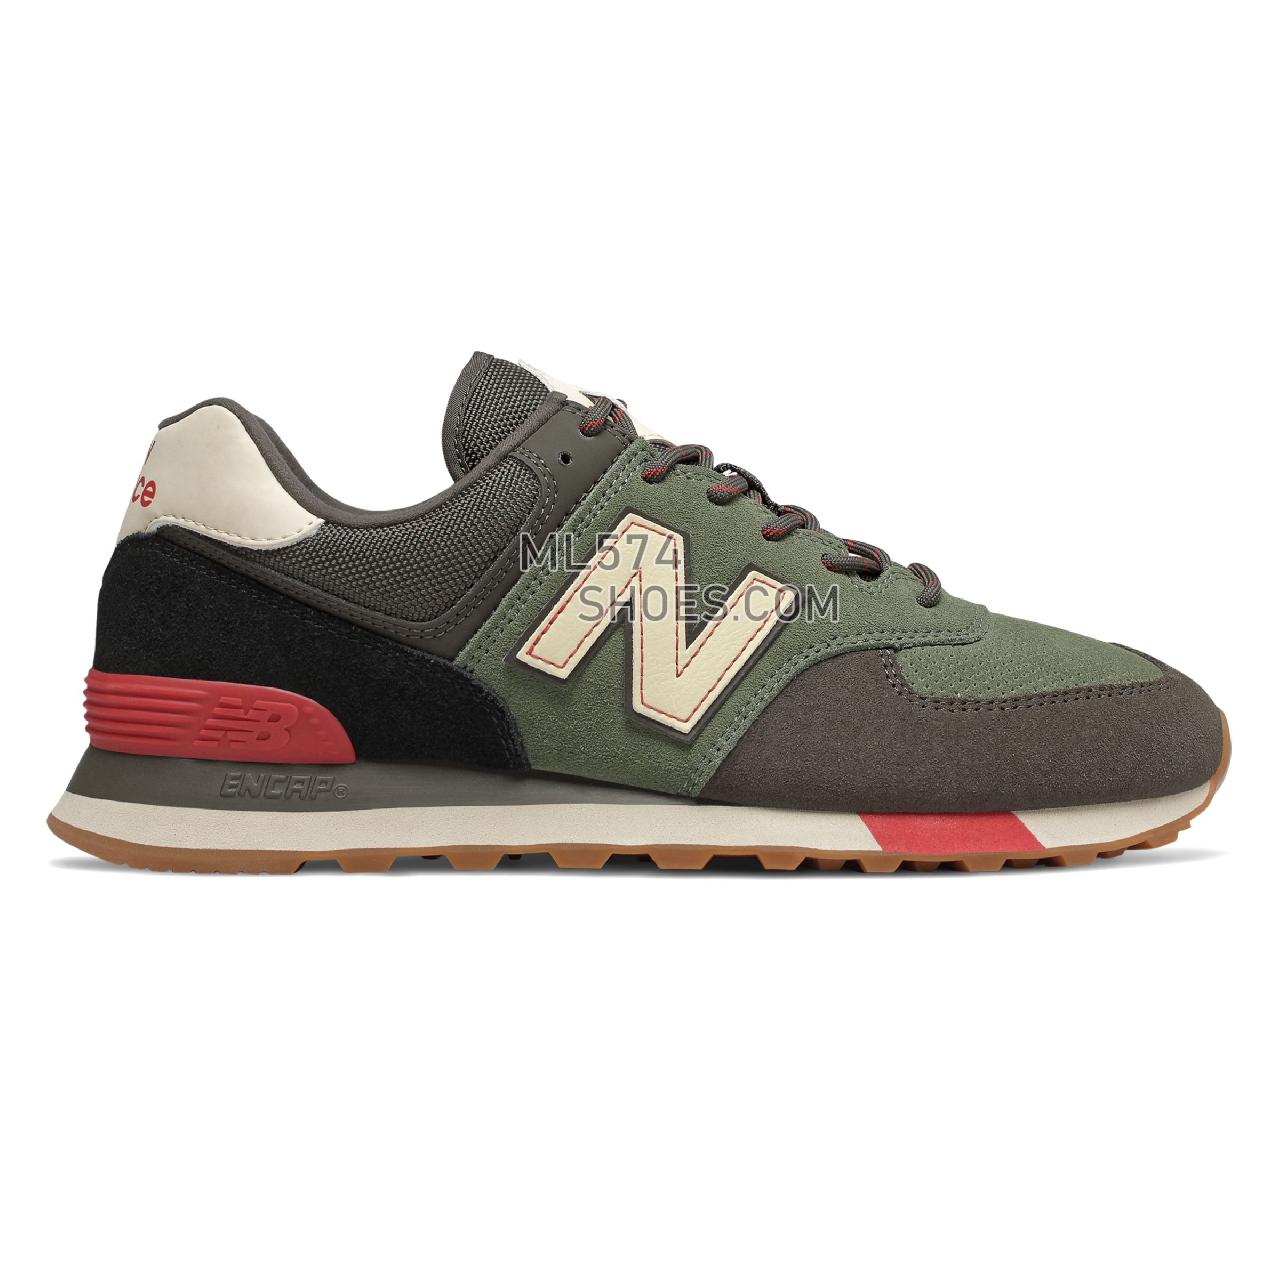 New Balance 574 - Men's Classic Sneakers - Camo Green with Team Red - ML574JHR